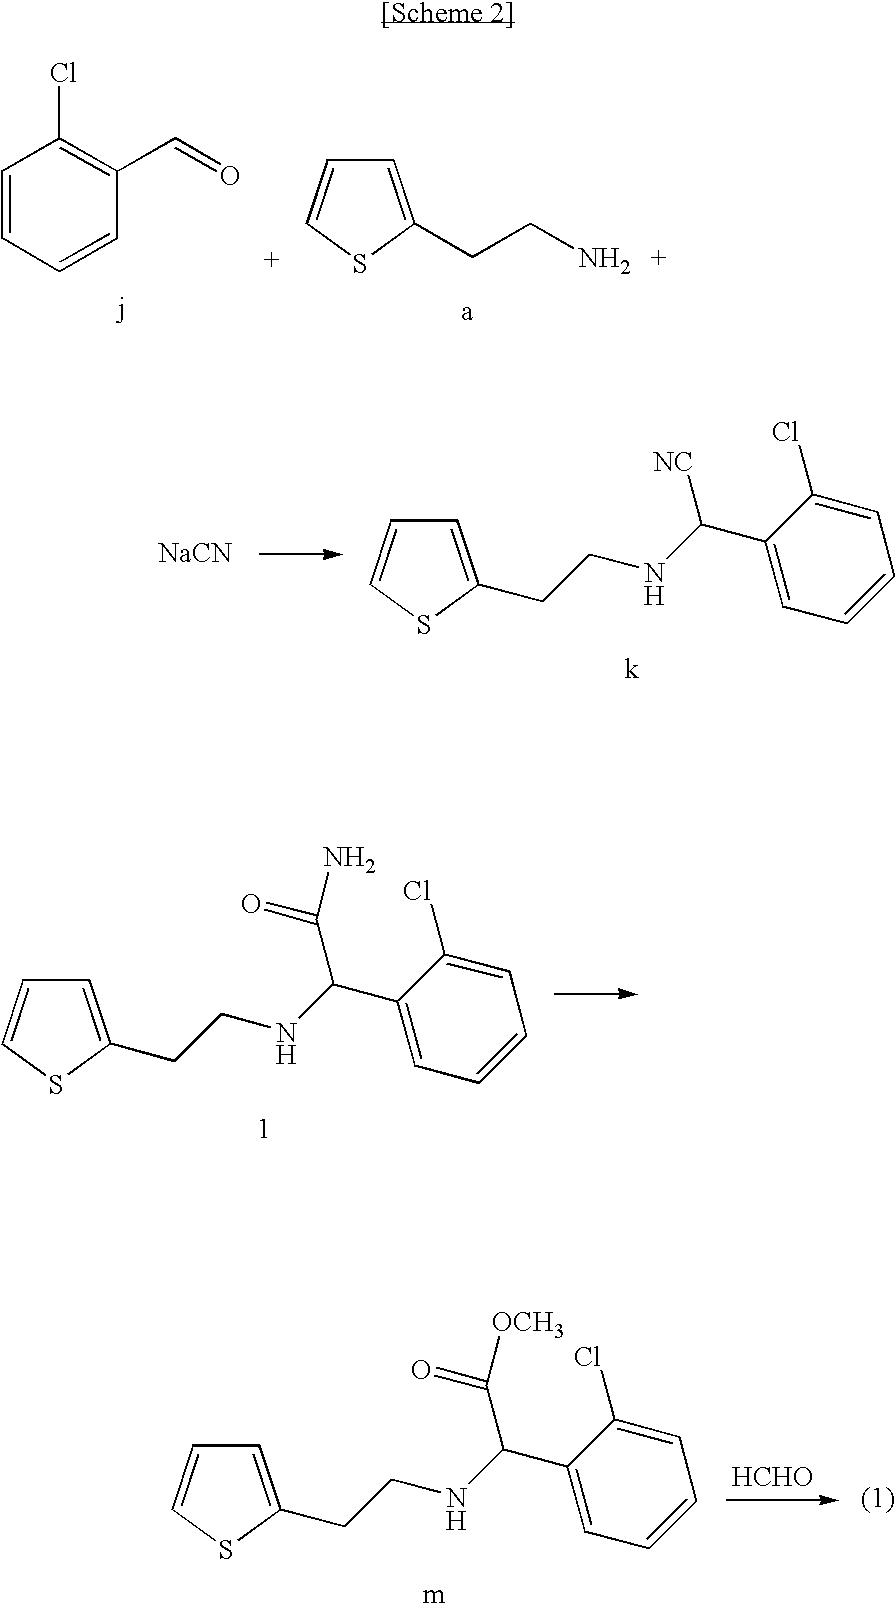 Process for the Preparation of S-(+)-Clopidogrel by Optical Resolution